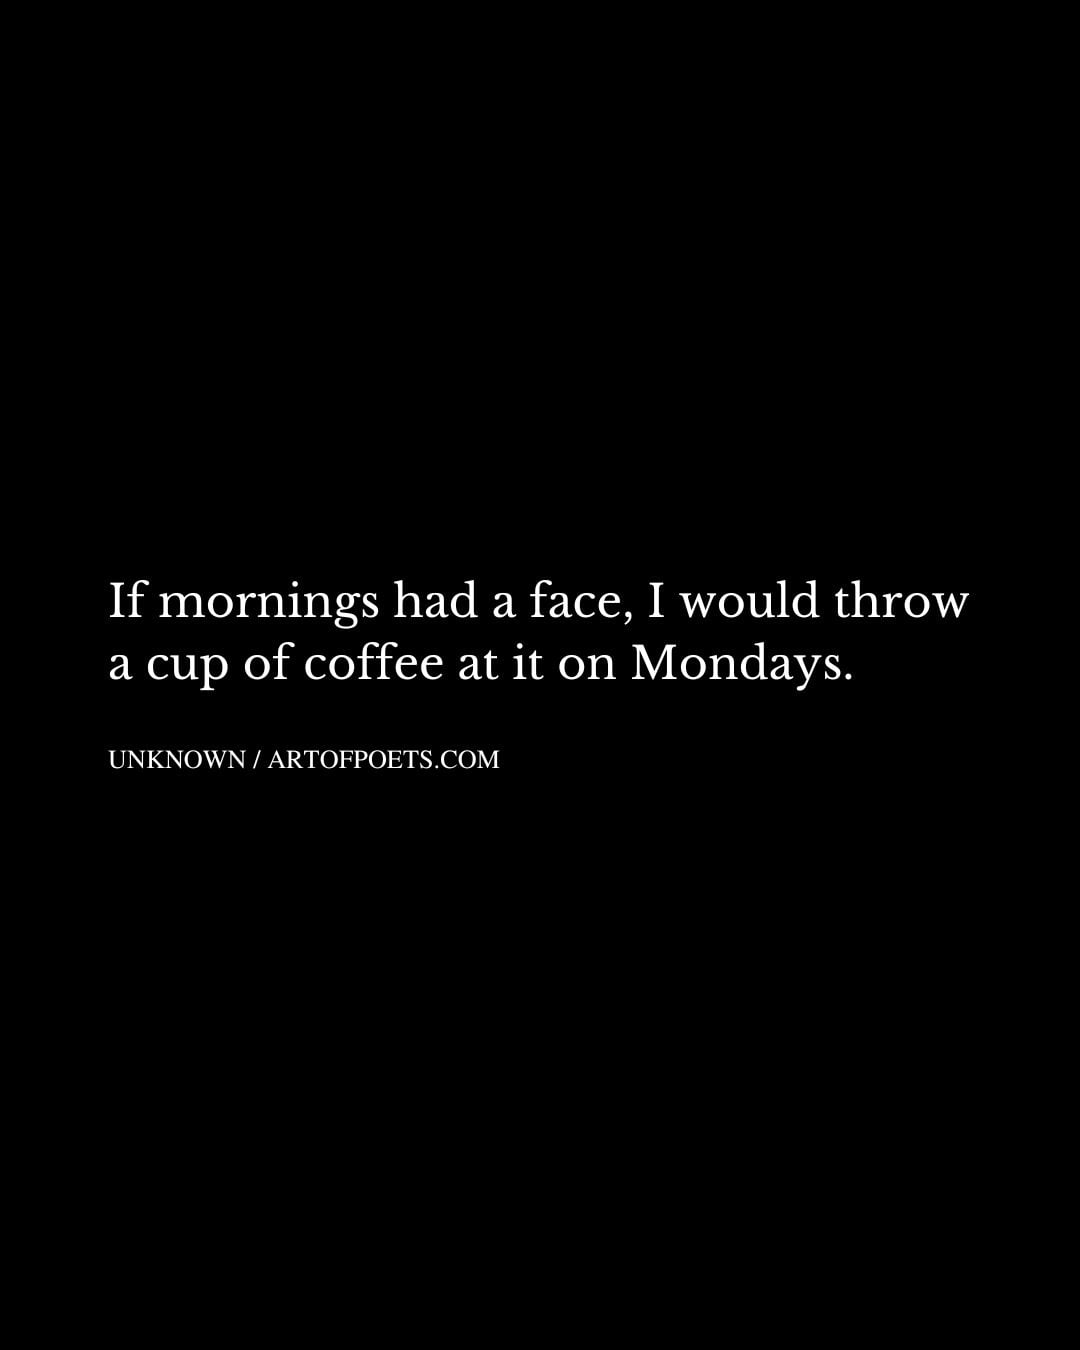 If mornings had a face I would throw a cup of coffee at it on Mondays